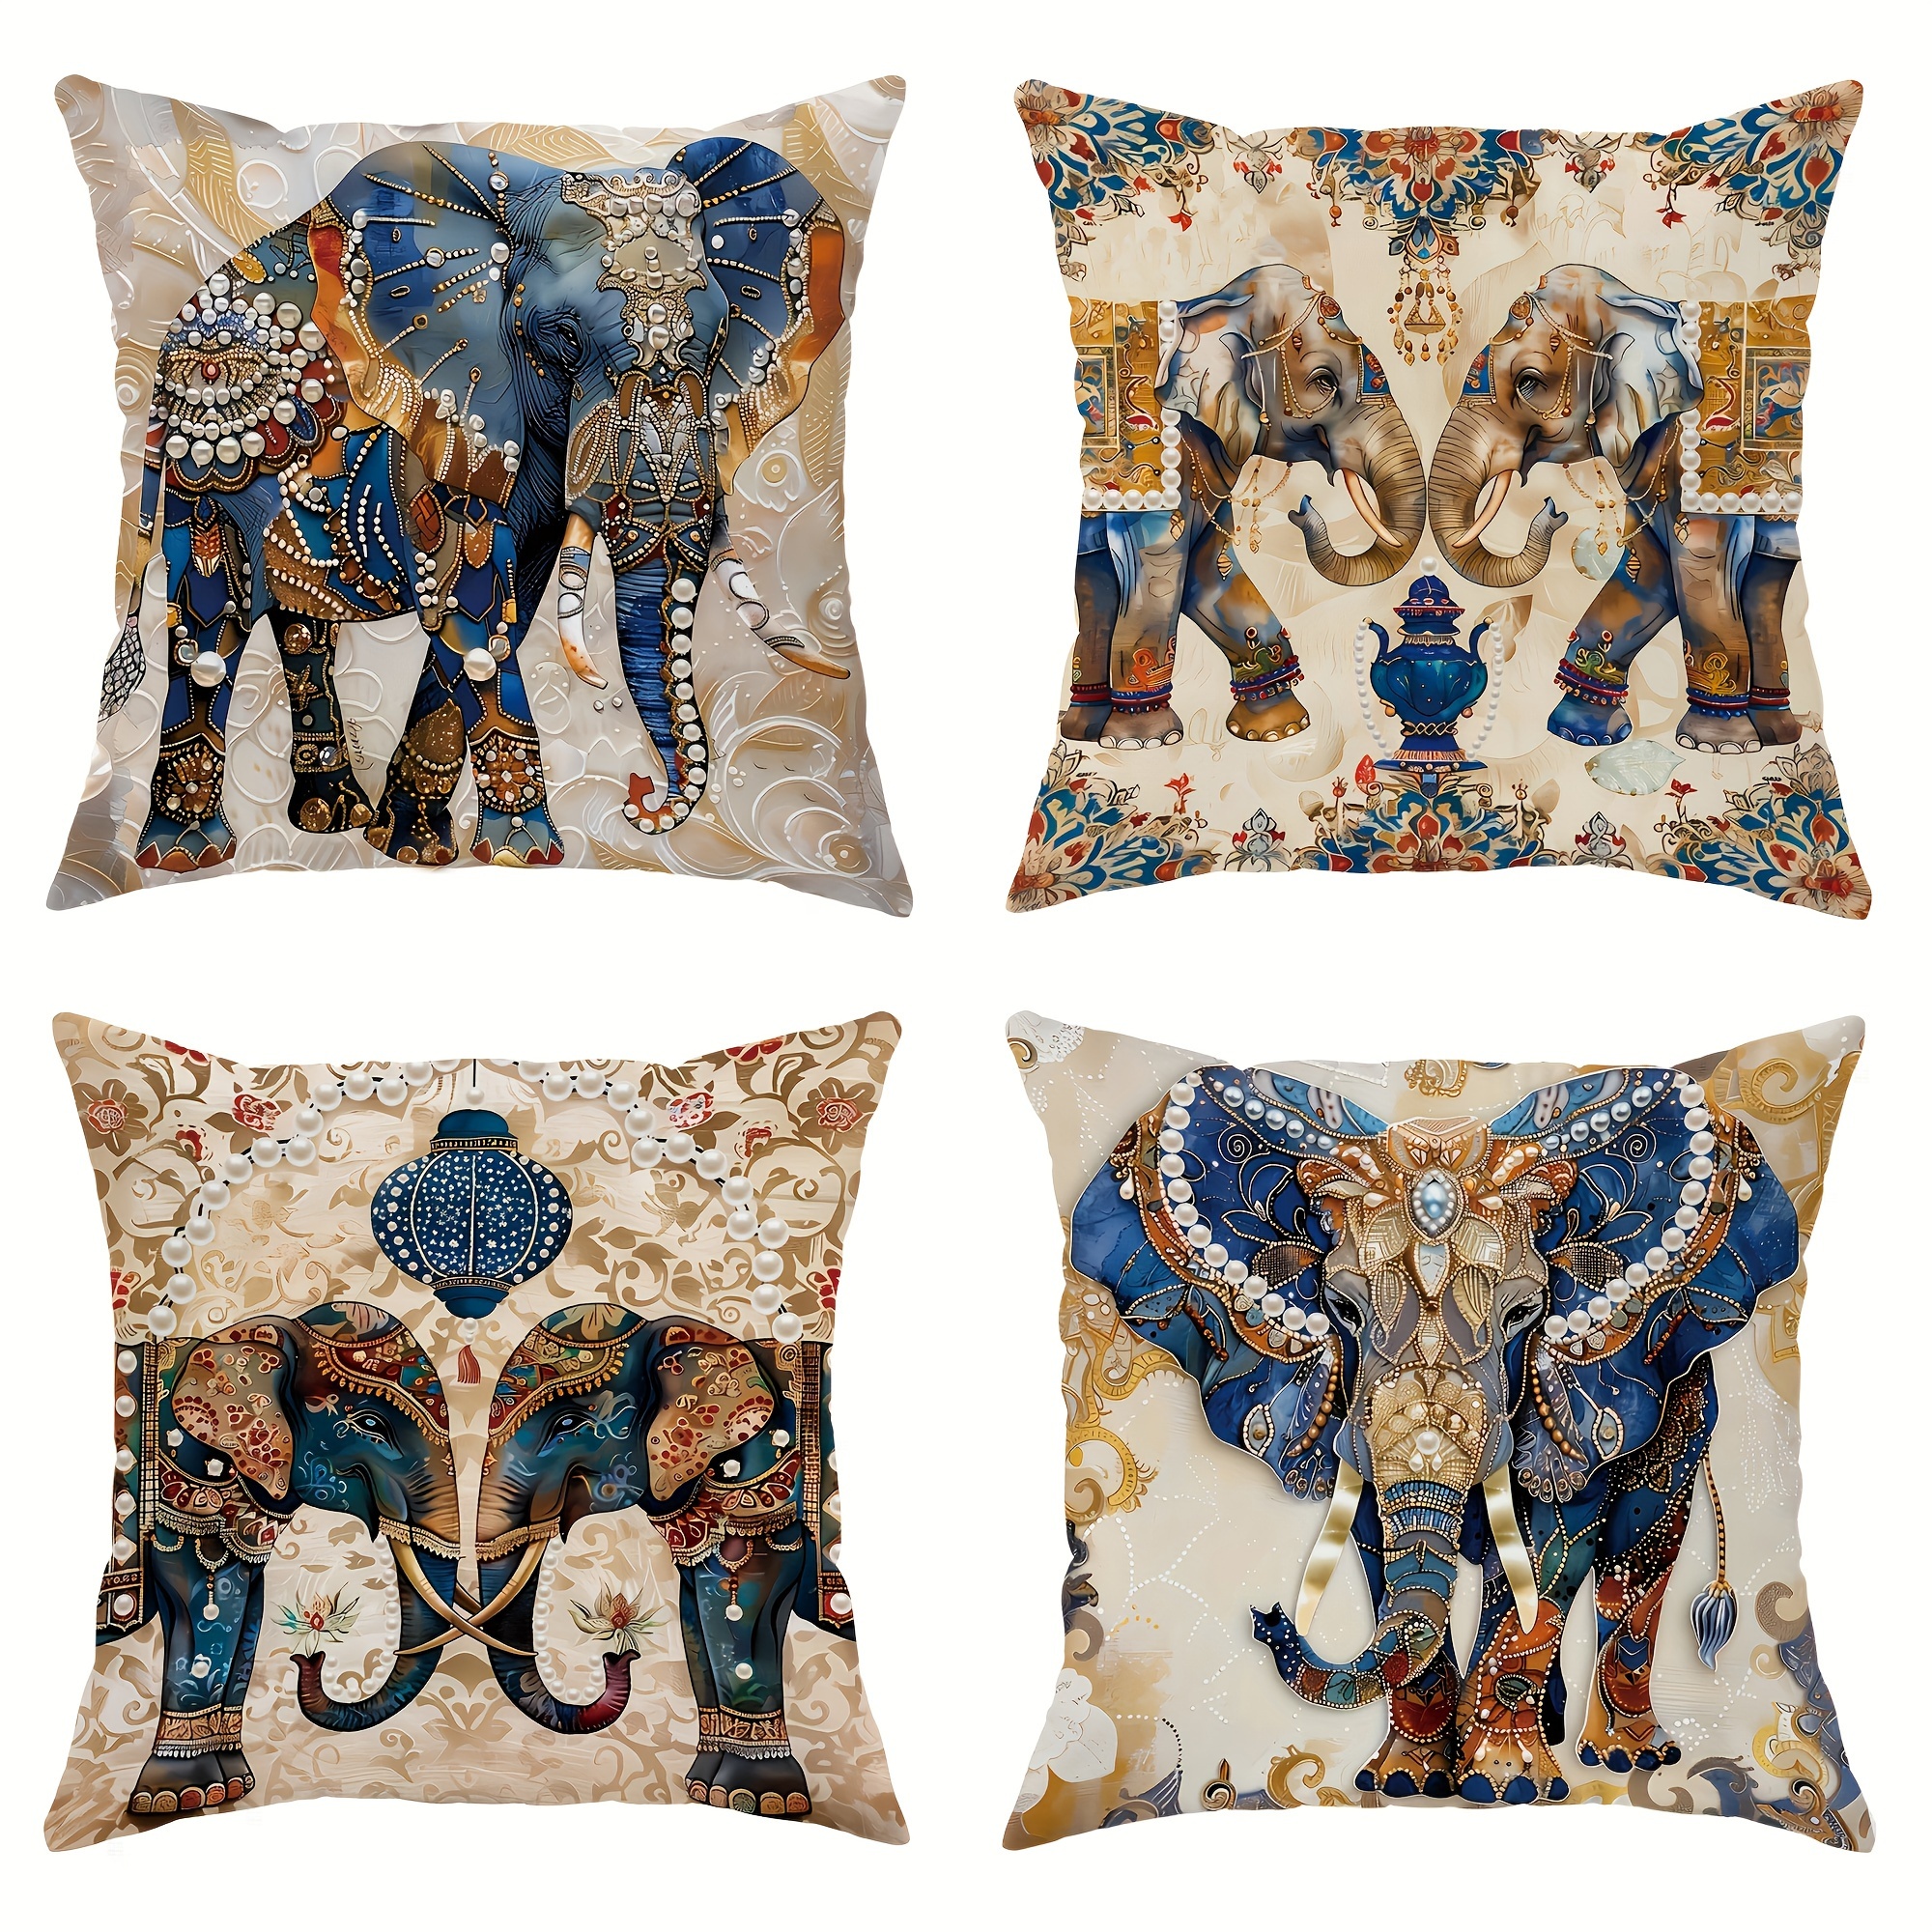 

4-piece Set Linen Throw Pillow Covers With Elephant & Pearl Flower Design - Golden, Blue, Earthy Yellow | 18x18 Inches | Bohemian Ethnic Style Decorative Cushion Cases For Living Room & Bedroom Sofa